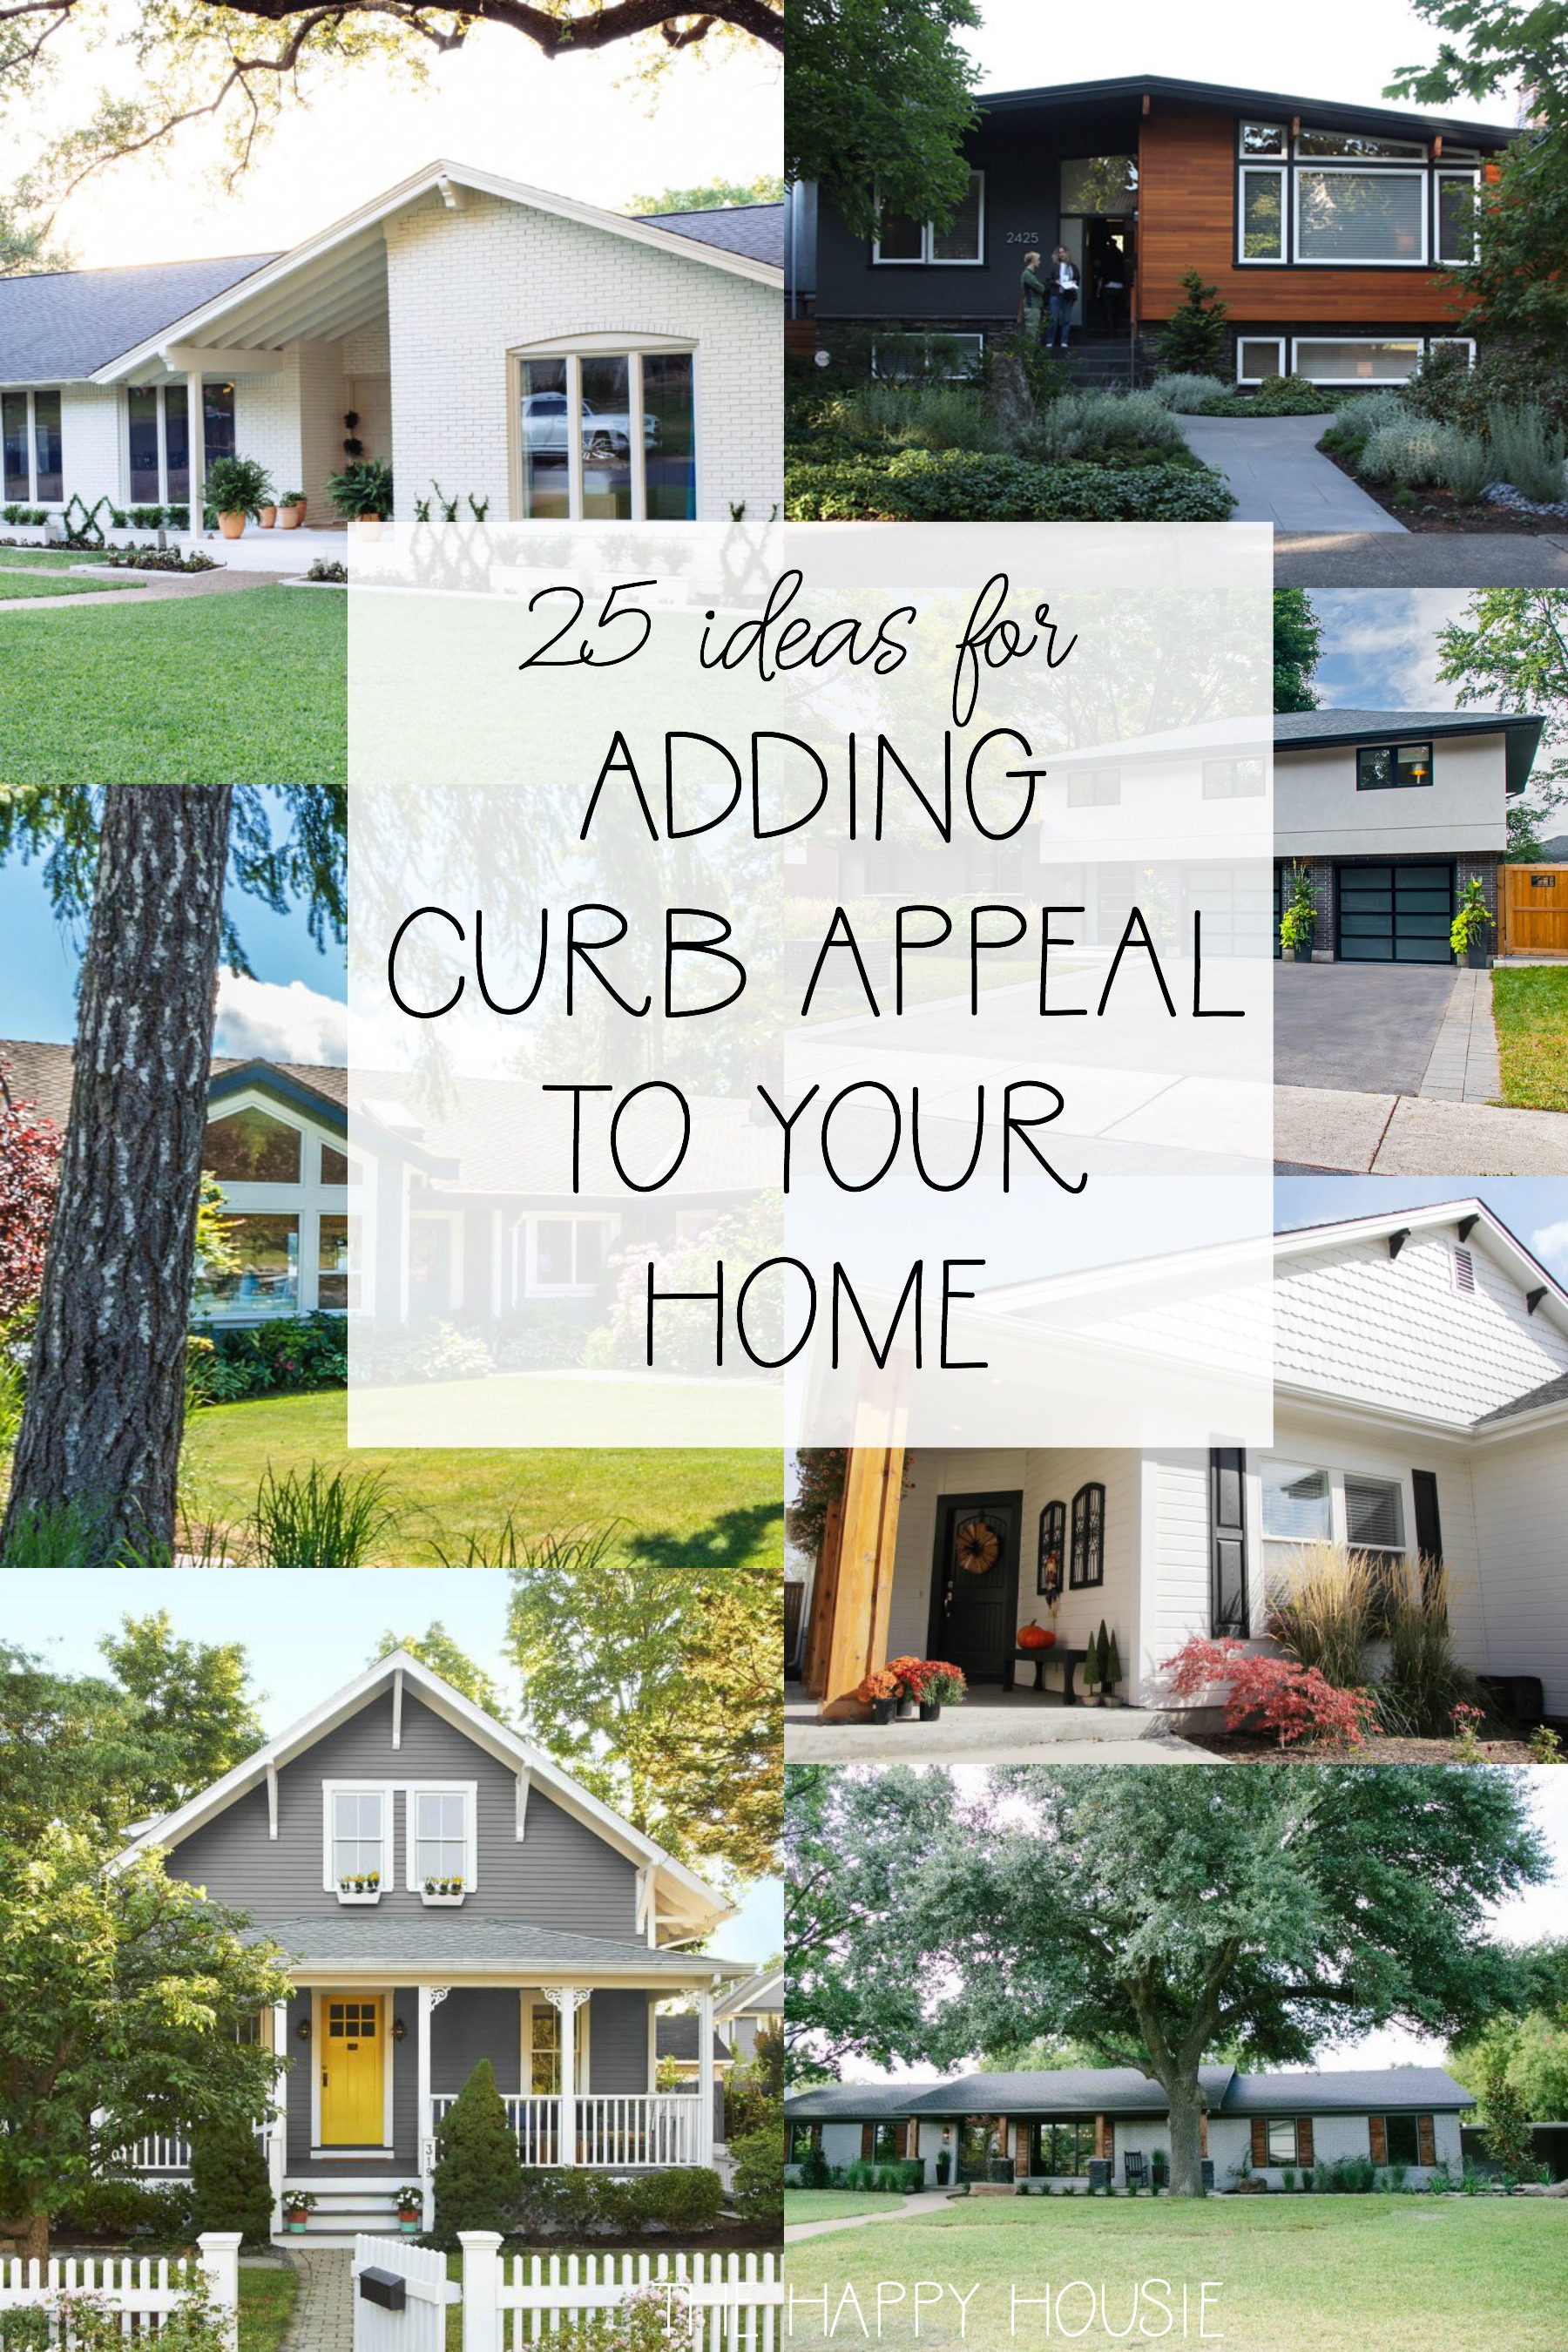 25 Ideas For Adding Curb Appeal To Your Home poster.